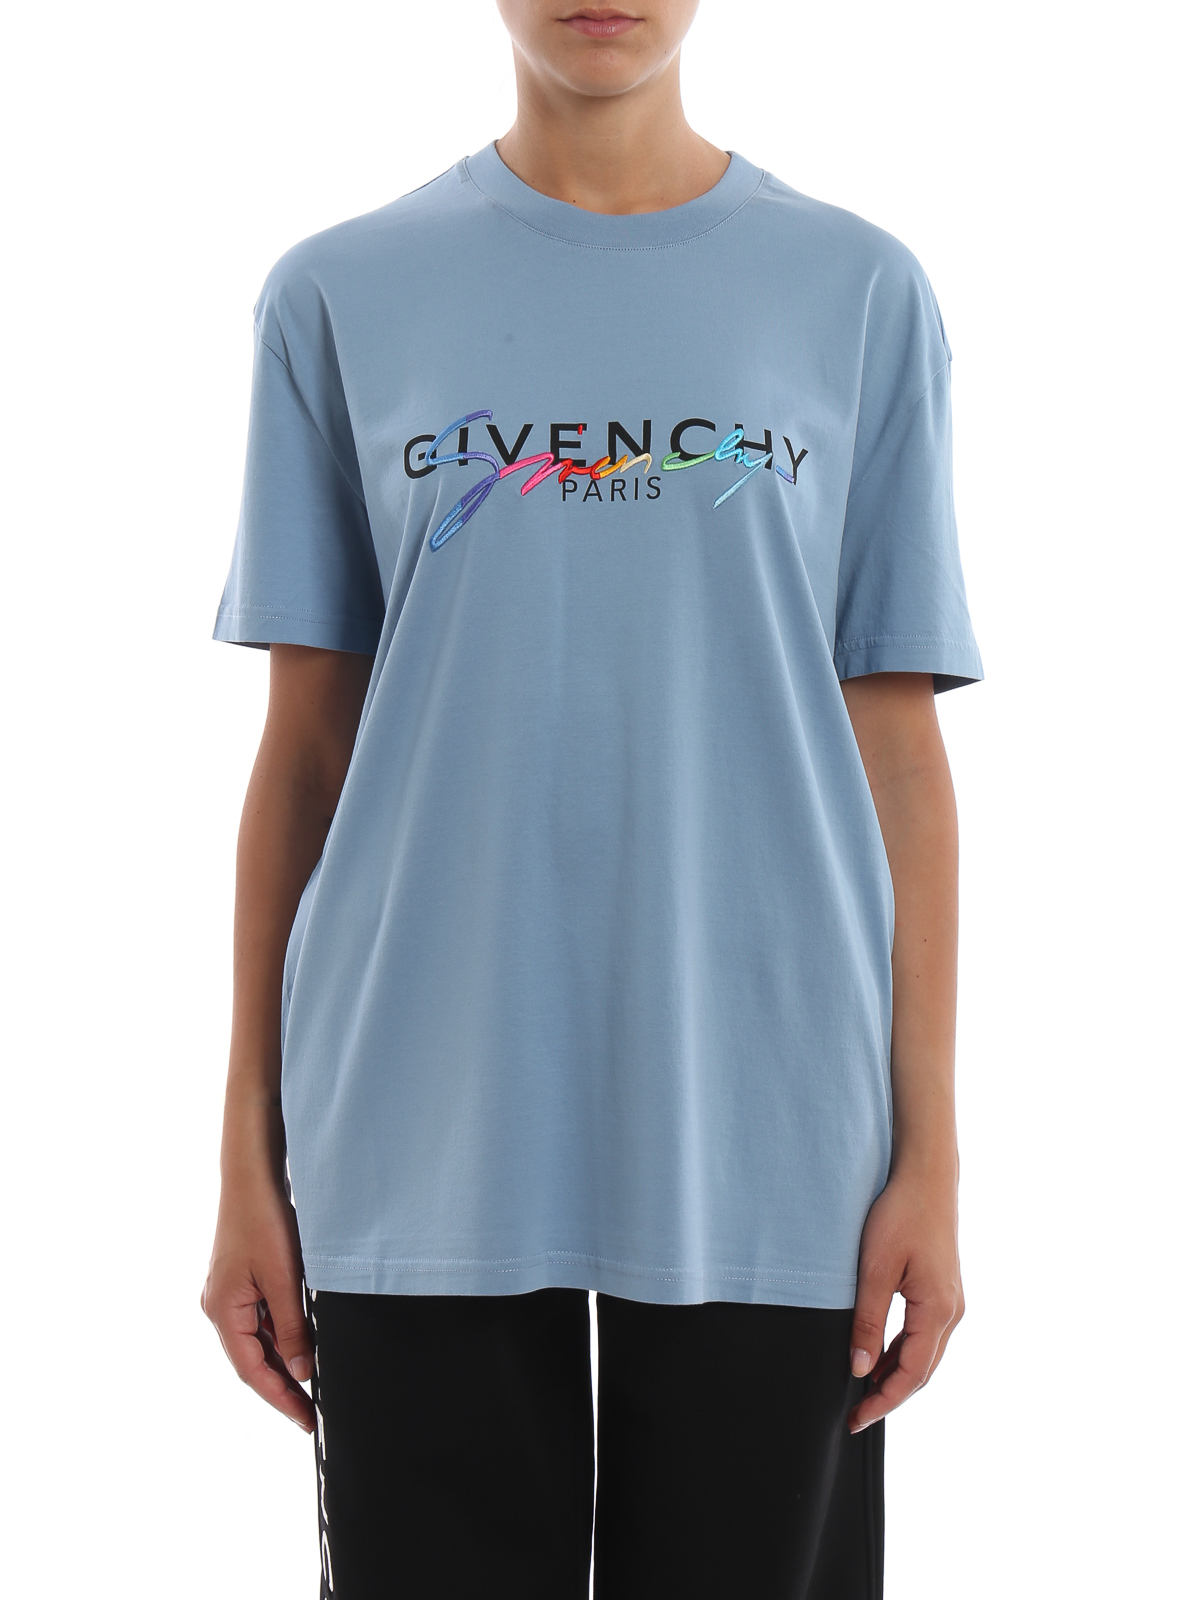 Zuidwest Klooster Tenslotte T-shirts Givenchy - Logo embroidery over T-shirt - BW70603Z2C450